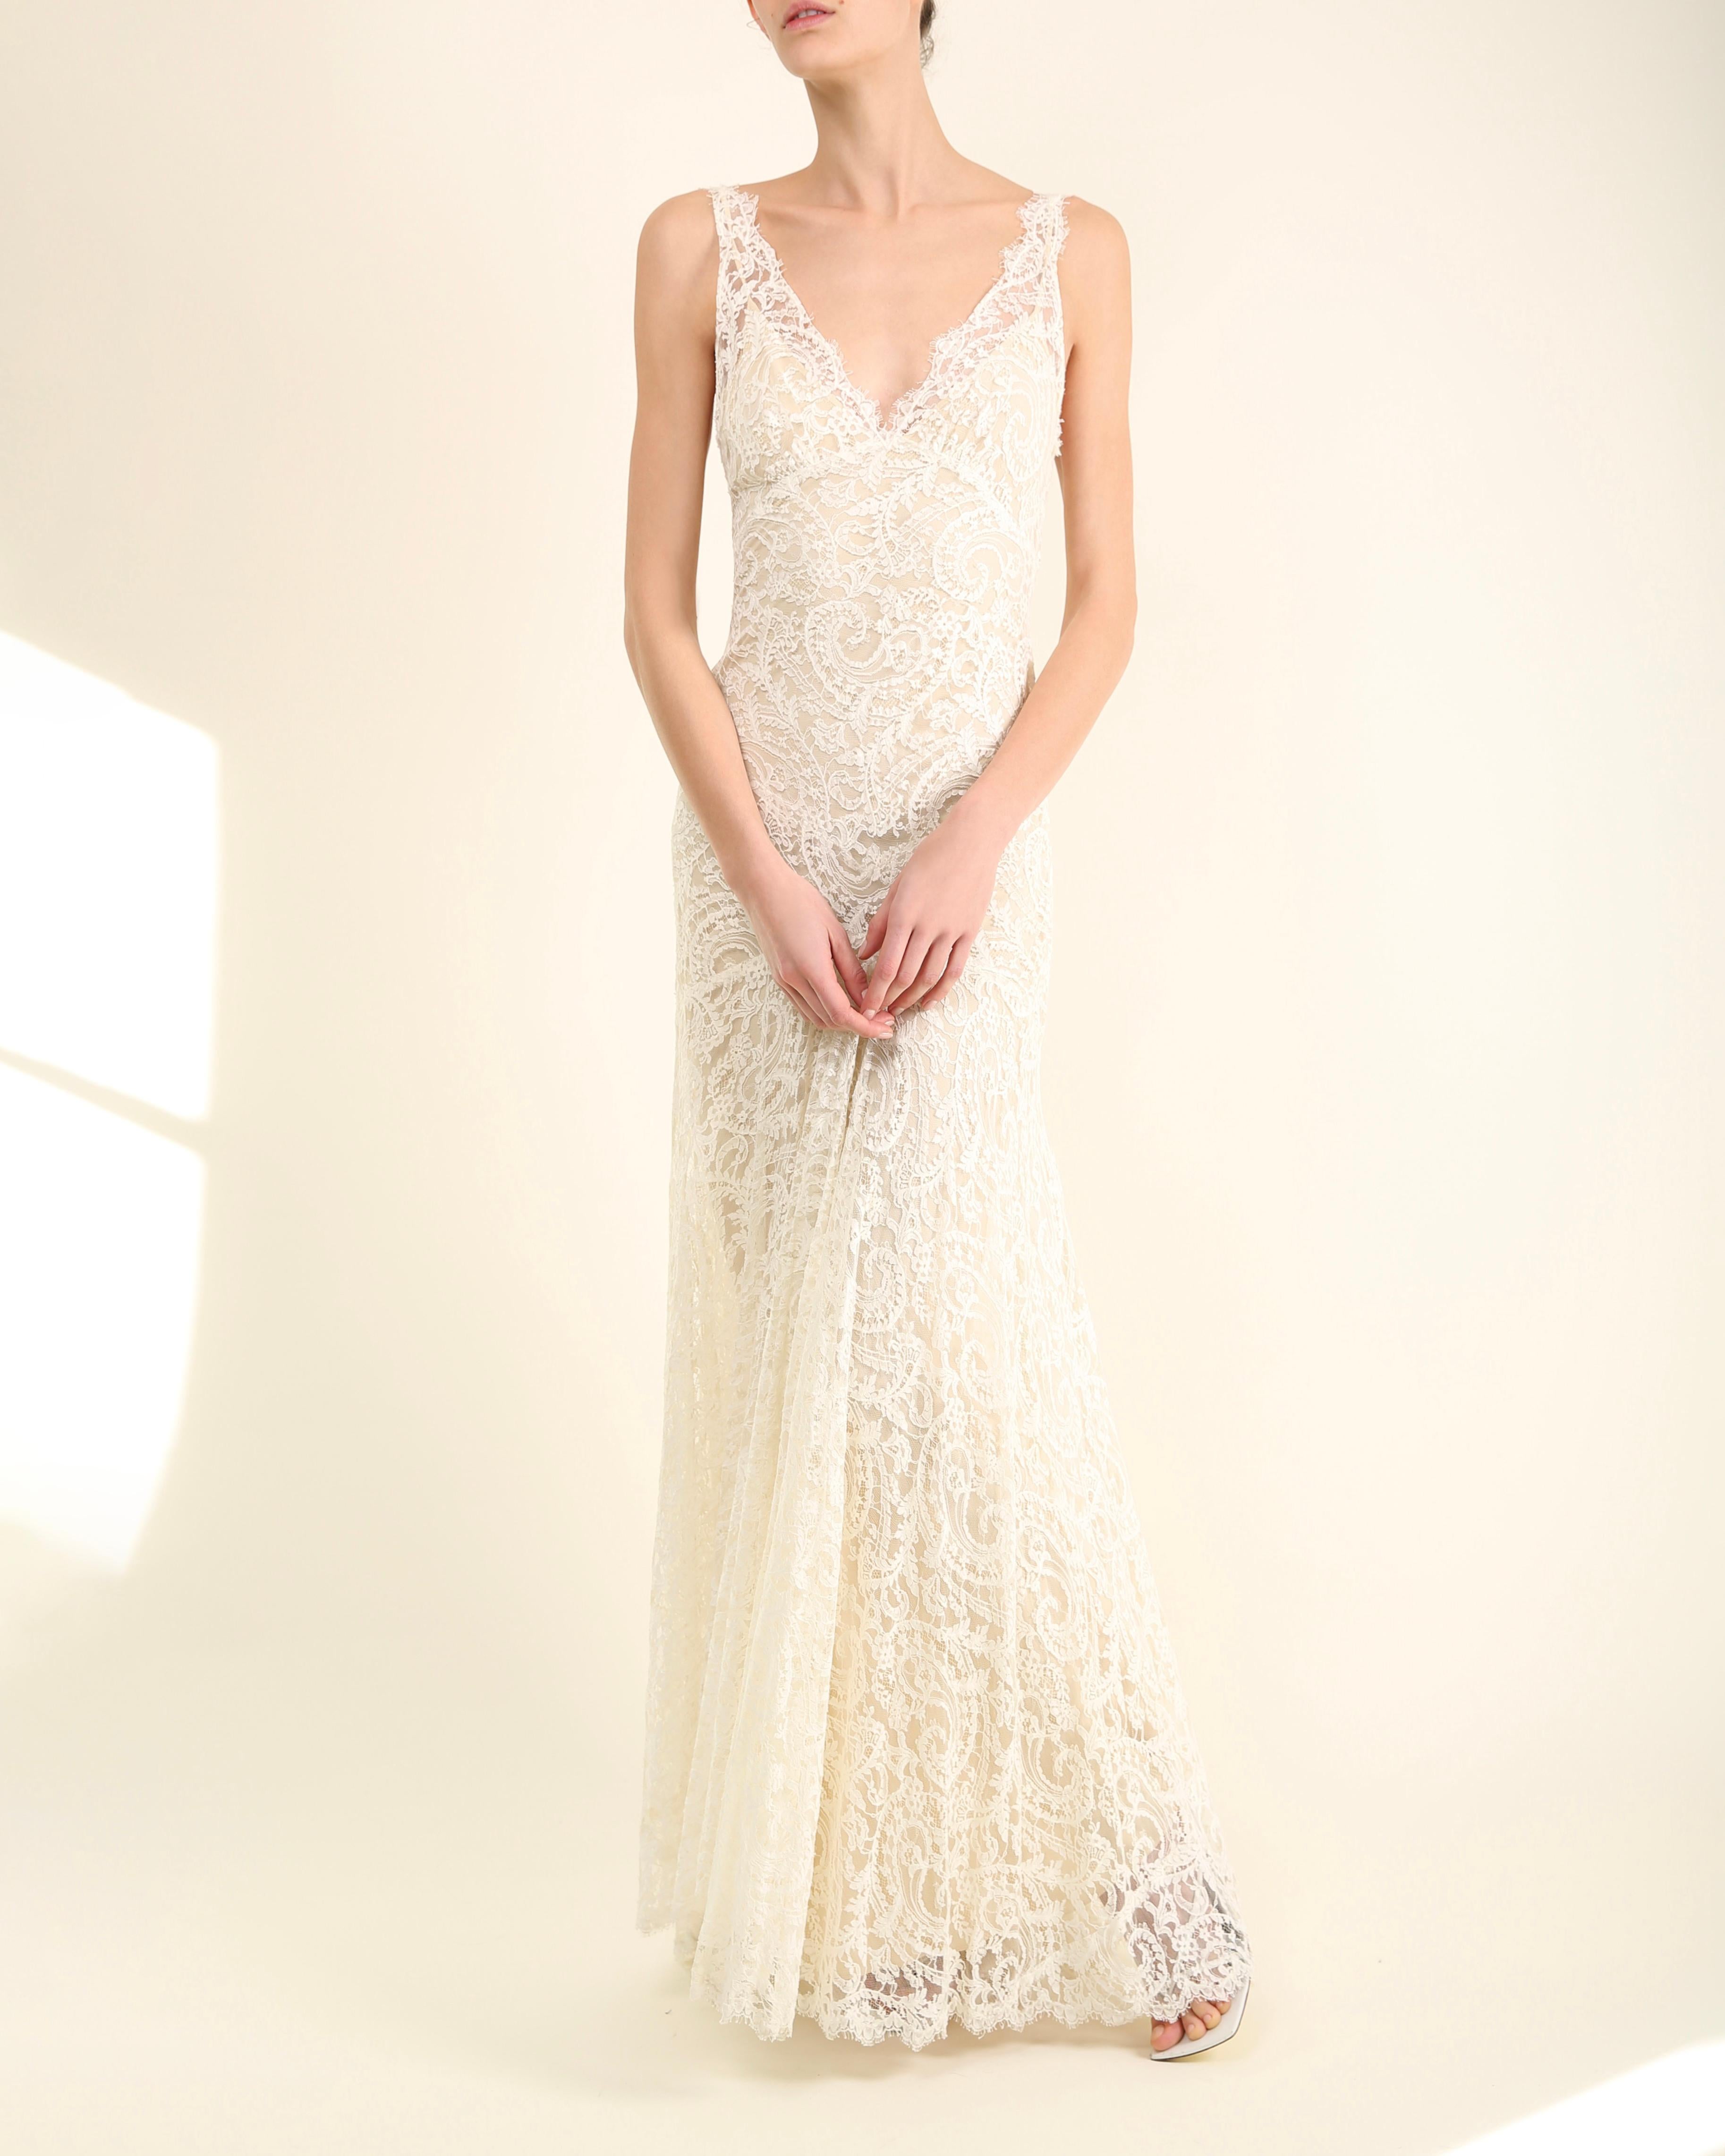 Monique Lhuillier ivory lace plunging backless wedding gown with train dress  5